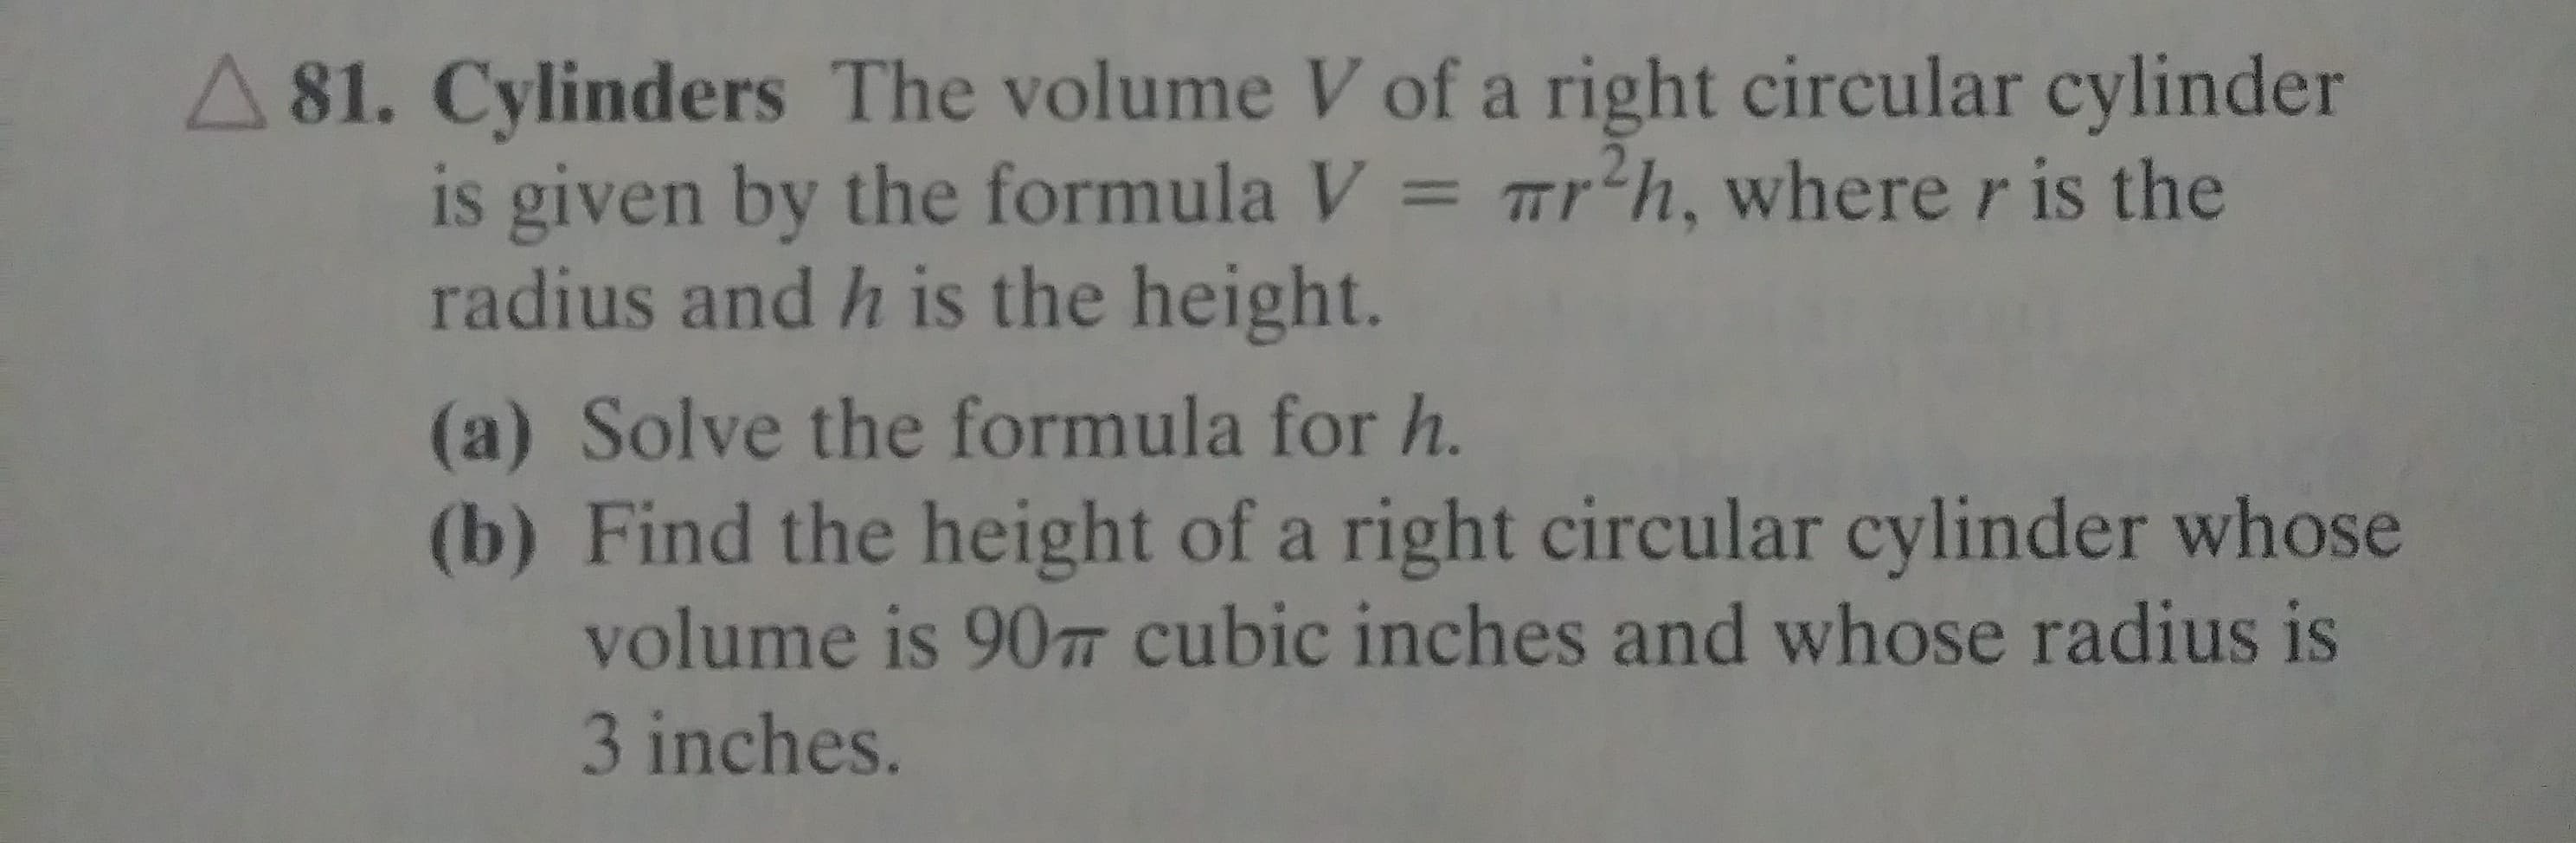 A 81. Cylinders The volume V of a right circular cylinder
is given by the formula V = Tr'h, where r is the
radius and h is the height.
(a) Solve the formula for h.
(b) Find the height of a right circular cylinder whose
volume is 90T cubic inches and whose radius is
3 inches.
